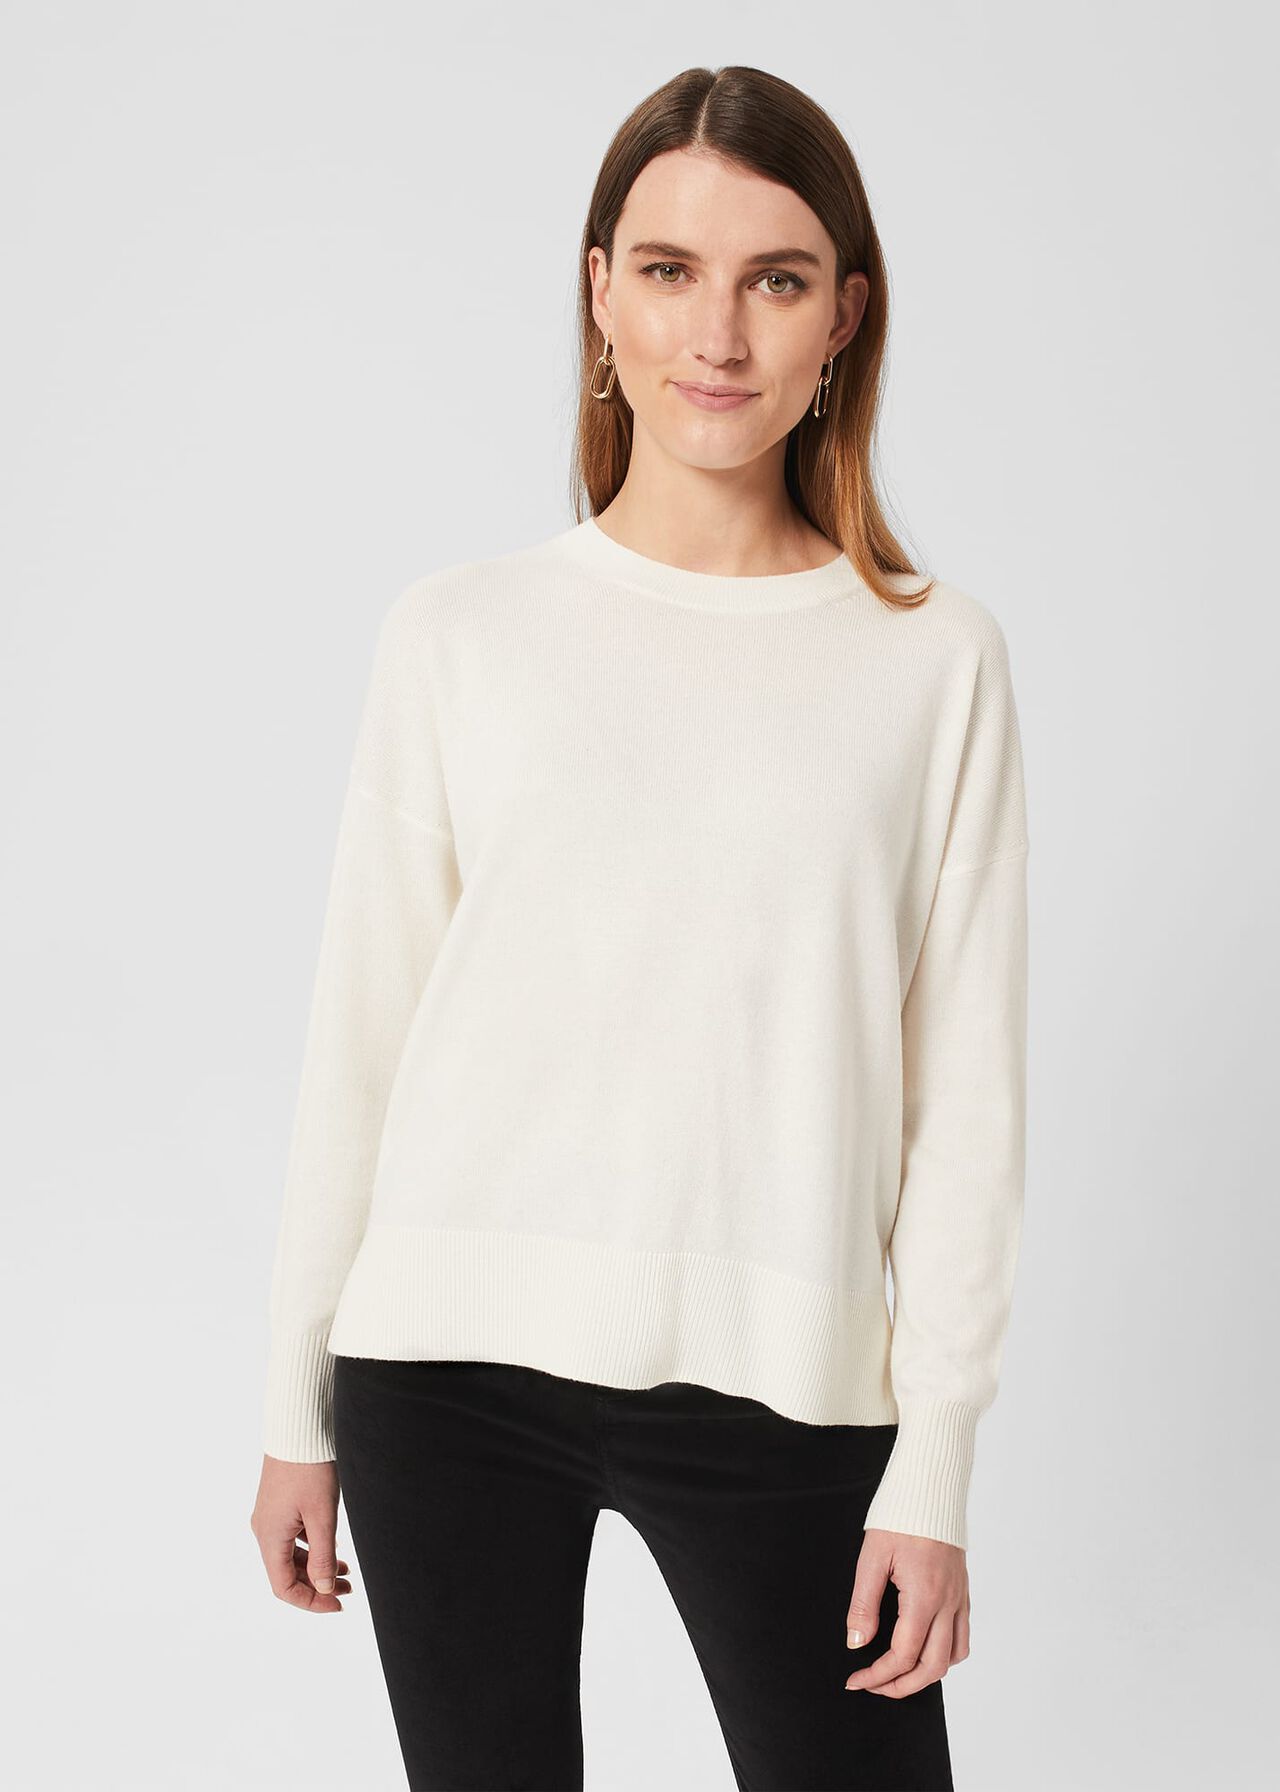 Lydia Button Jumper With Cashmere, Ivory, hi-res